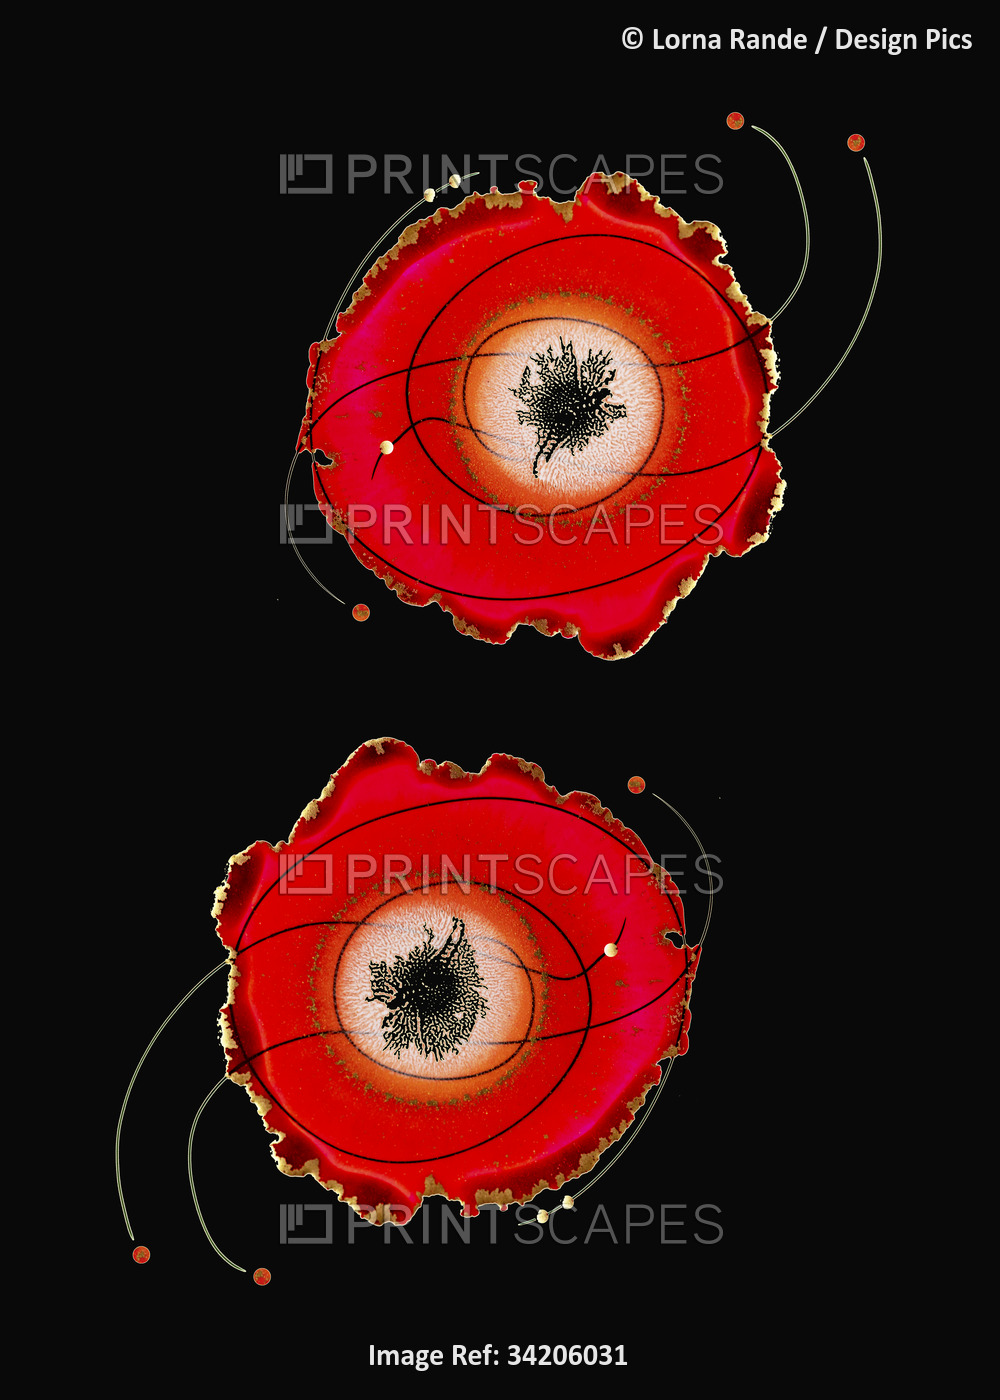 Two ink blot creations in red and black; Artwork